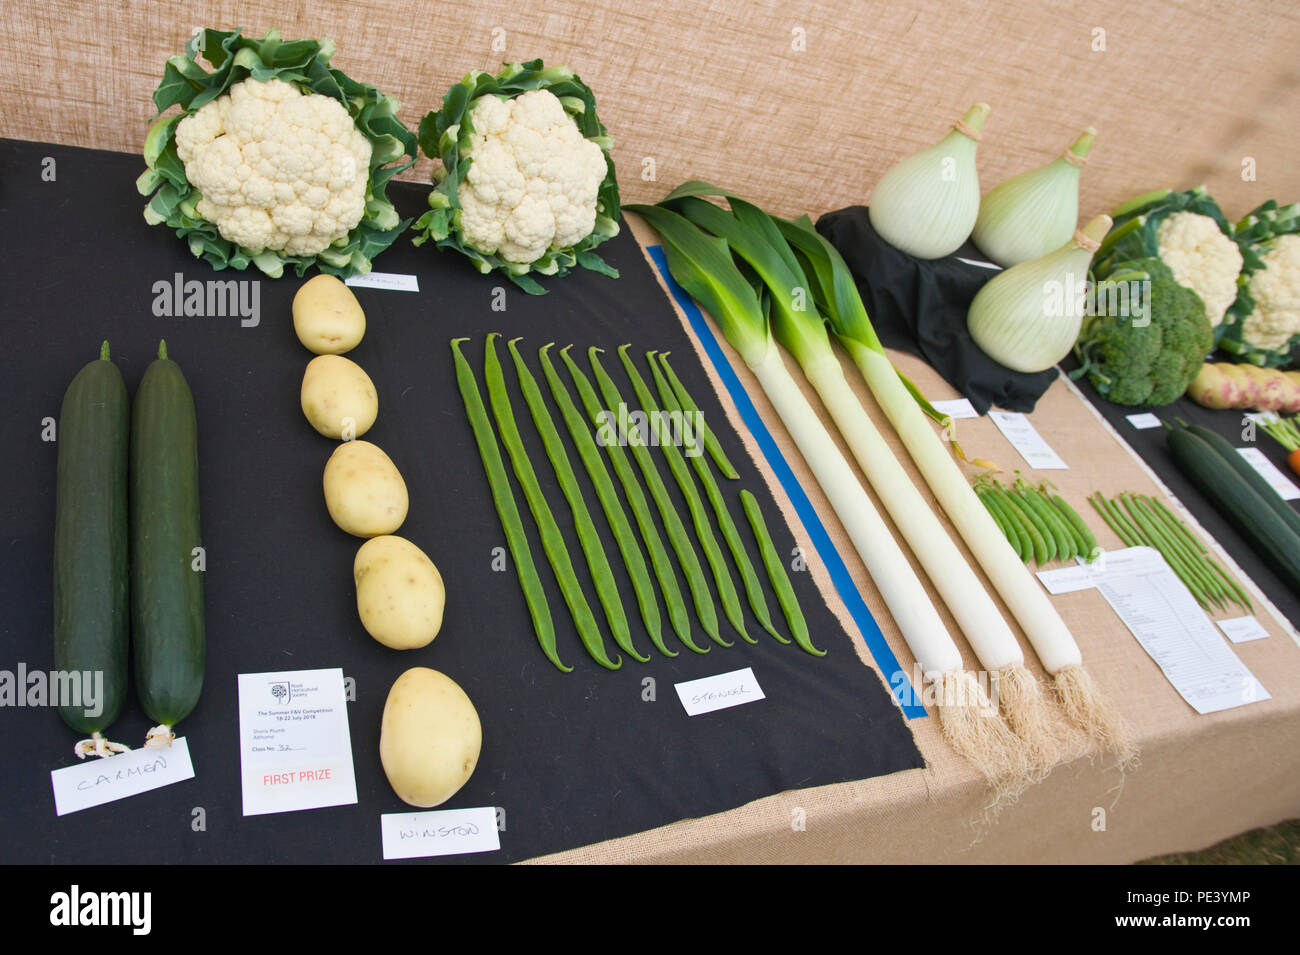 Prizewinning vegetables exhibited at RHS Tatton Park flower show Cheshire England UK Stock Photo